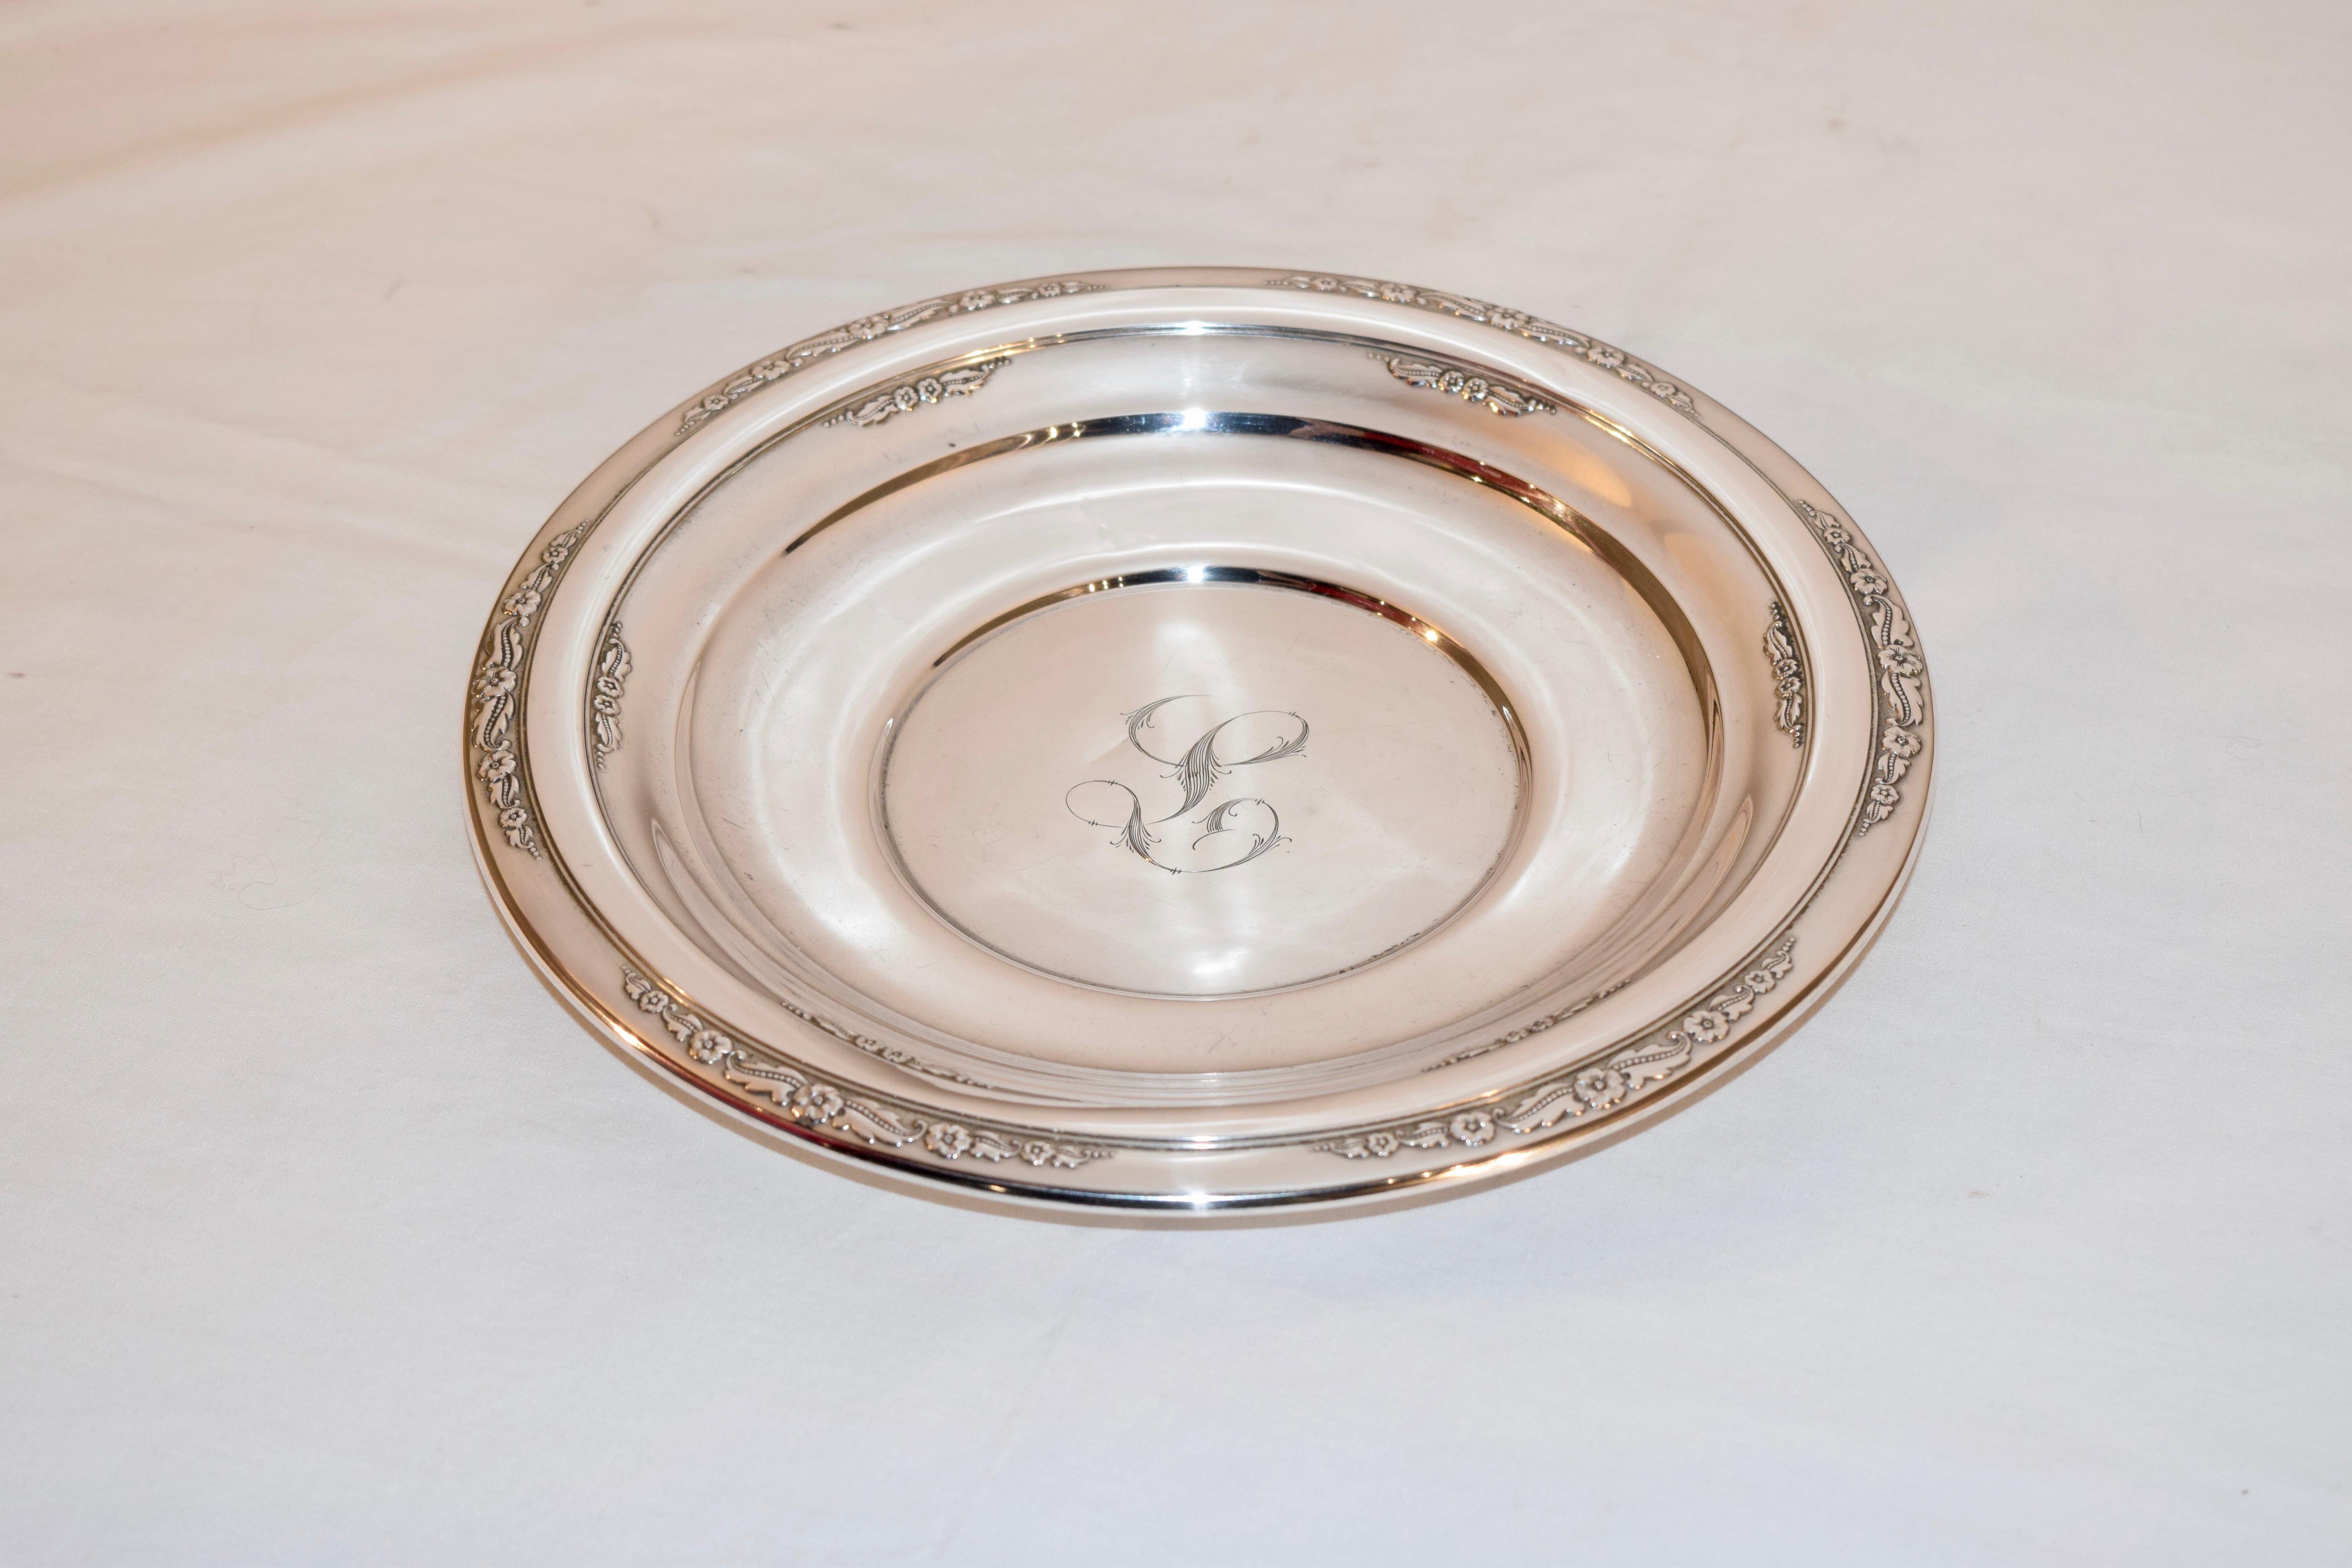 Sterling sandwich plate by International Silver, in the Courtship pattern, circa 1936. Engraved letter L in the center. Model number H280 and stamped on the back.